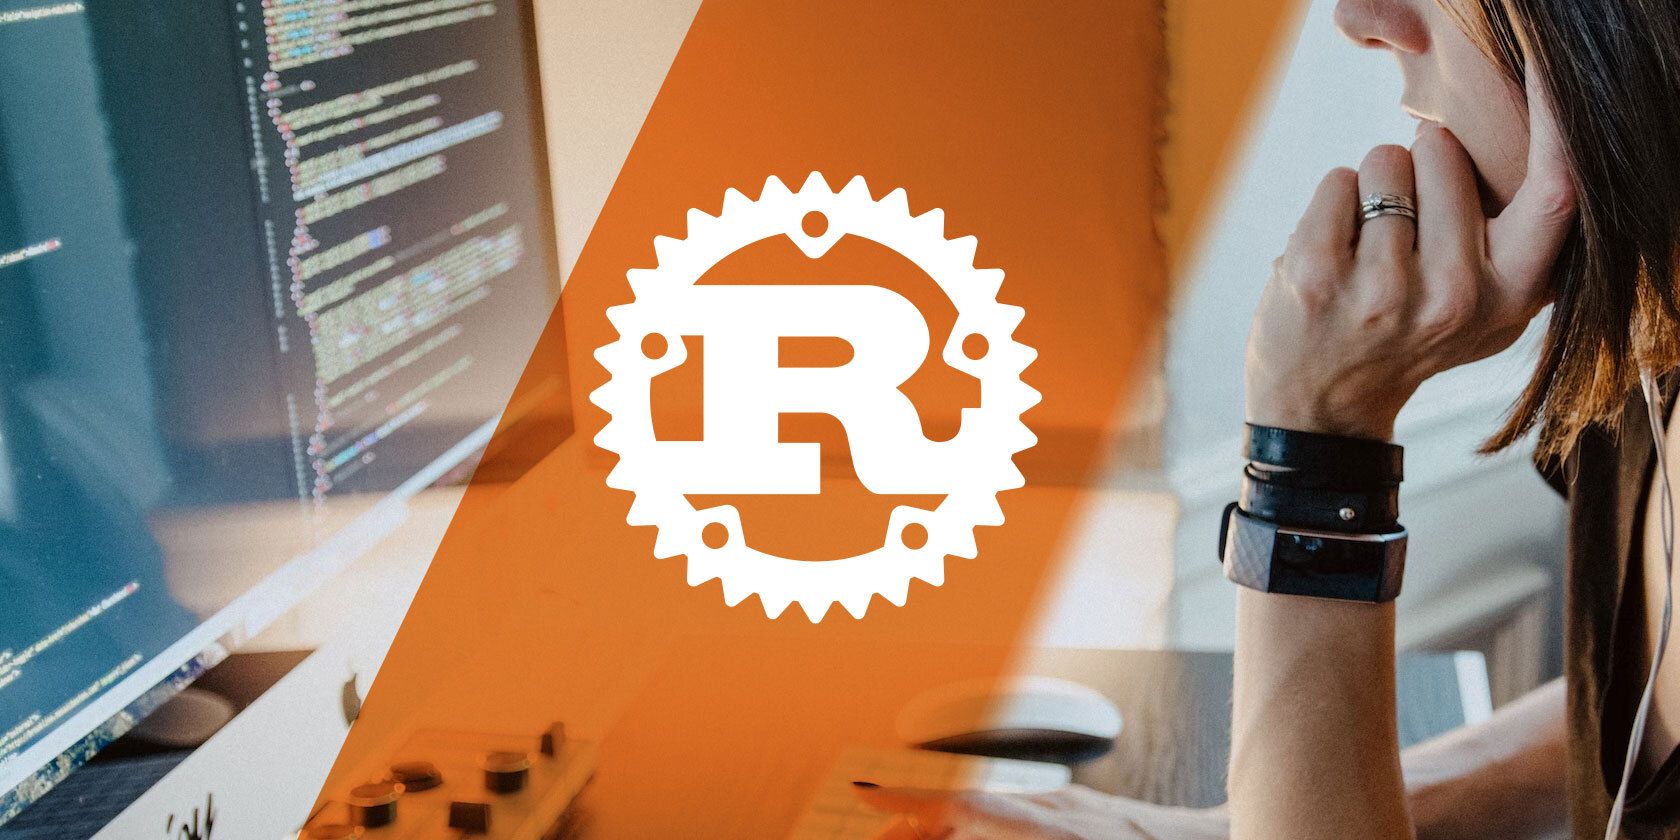 A Rust logo superimposed on a photograph of somebody working on an iMac desktop computer